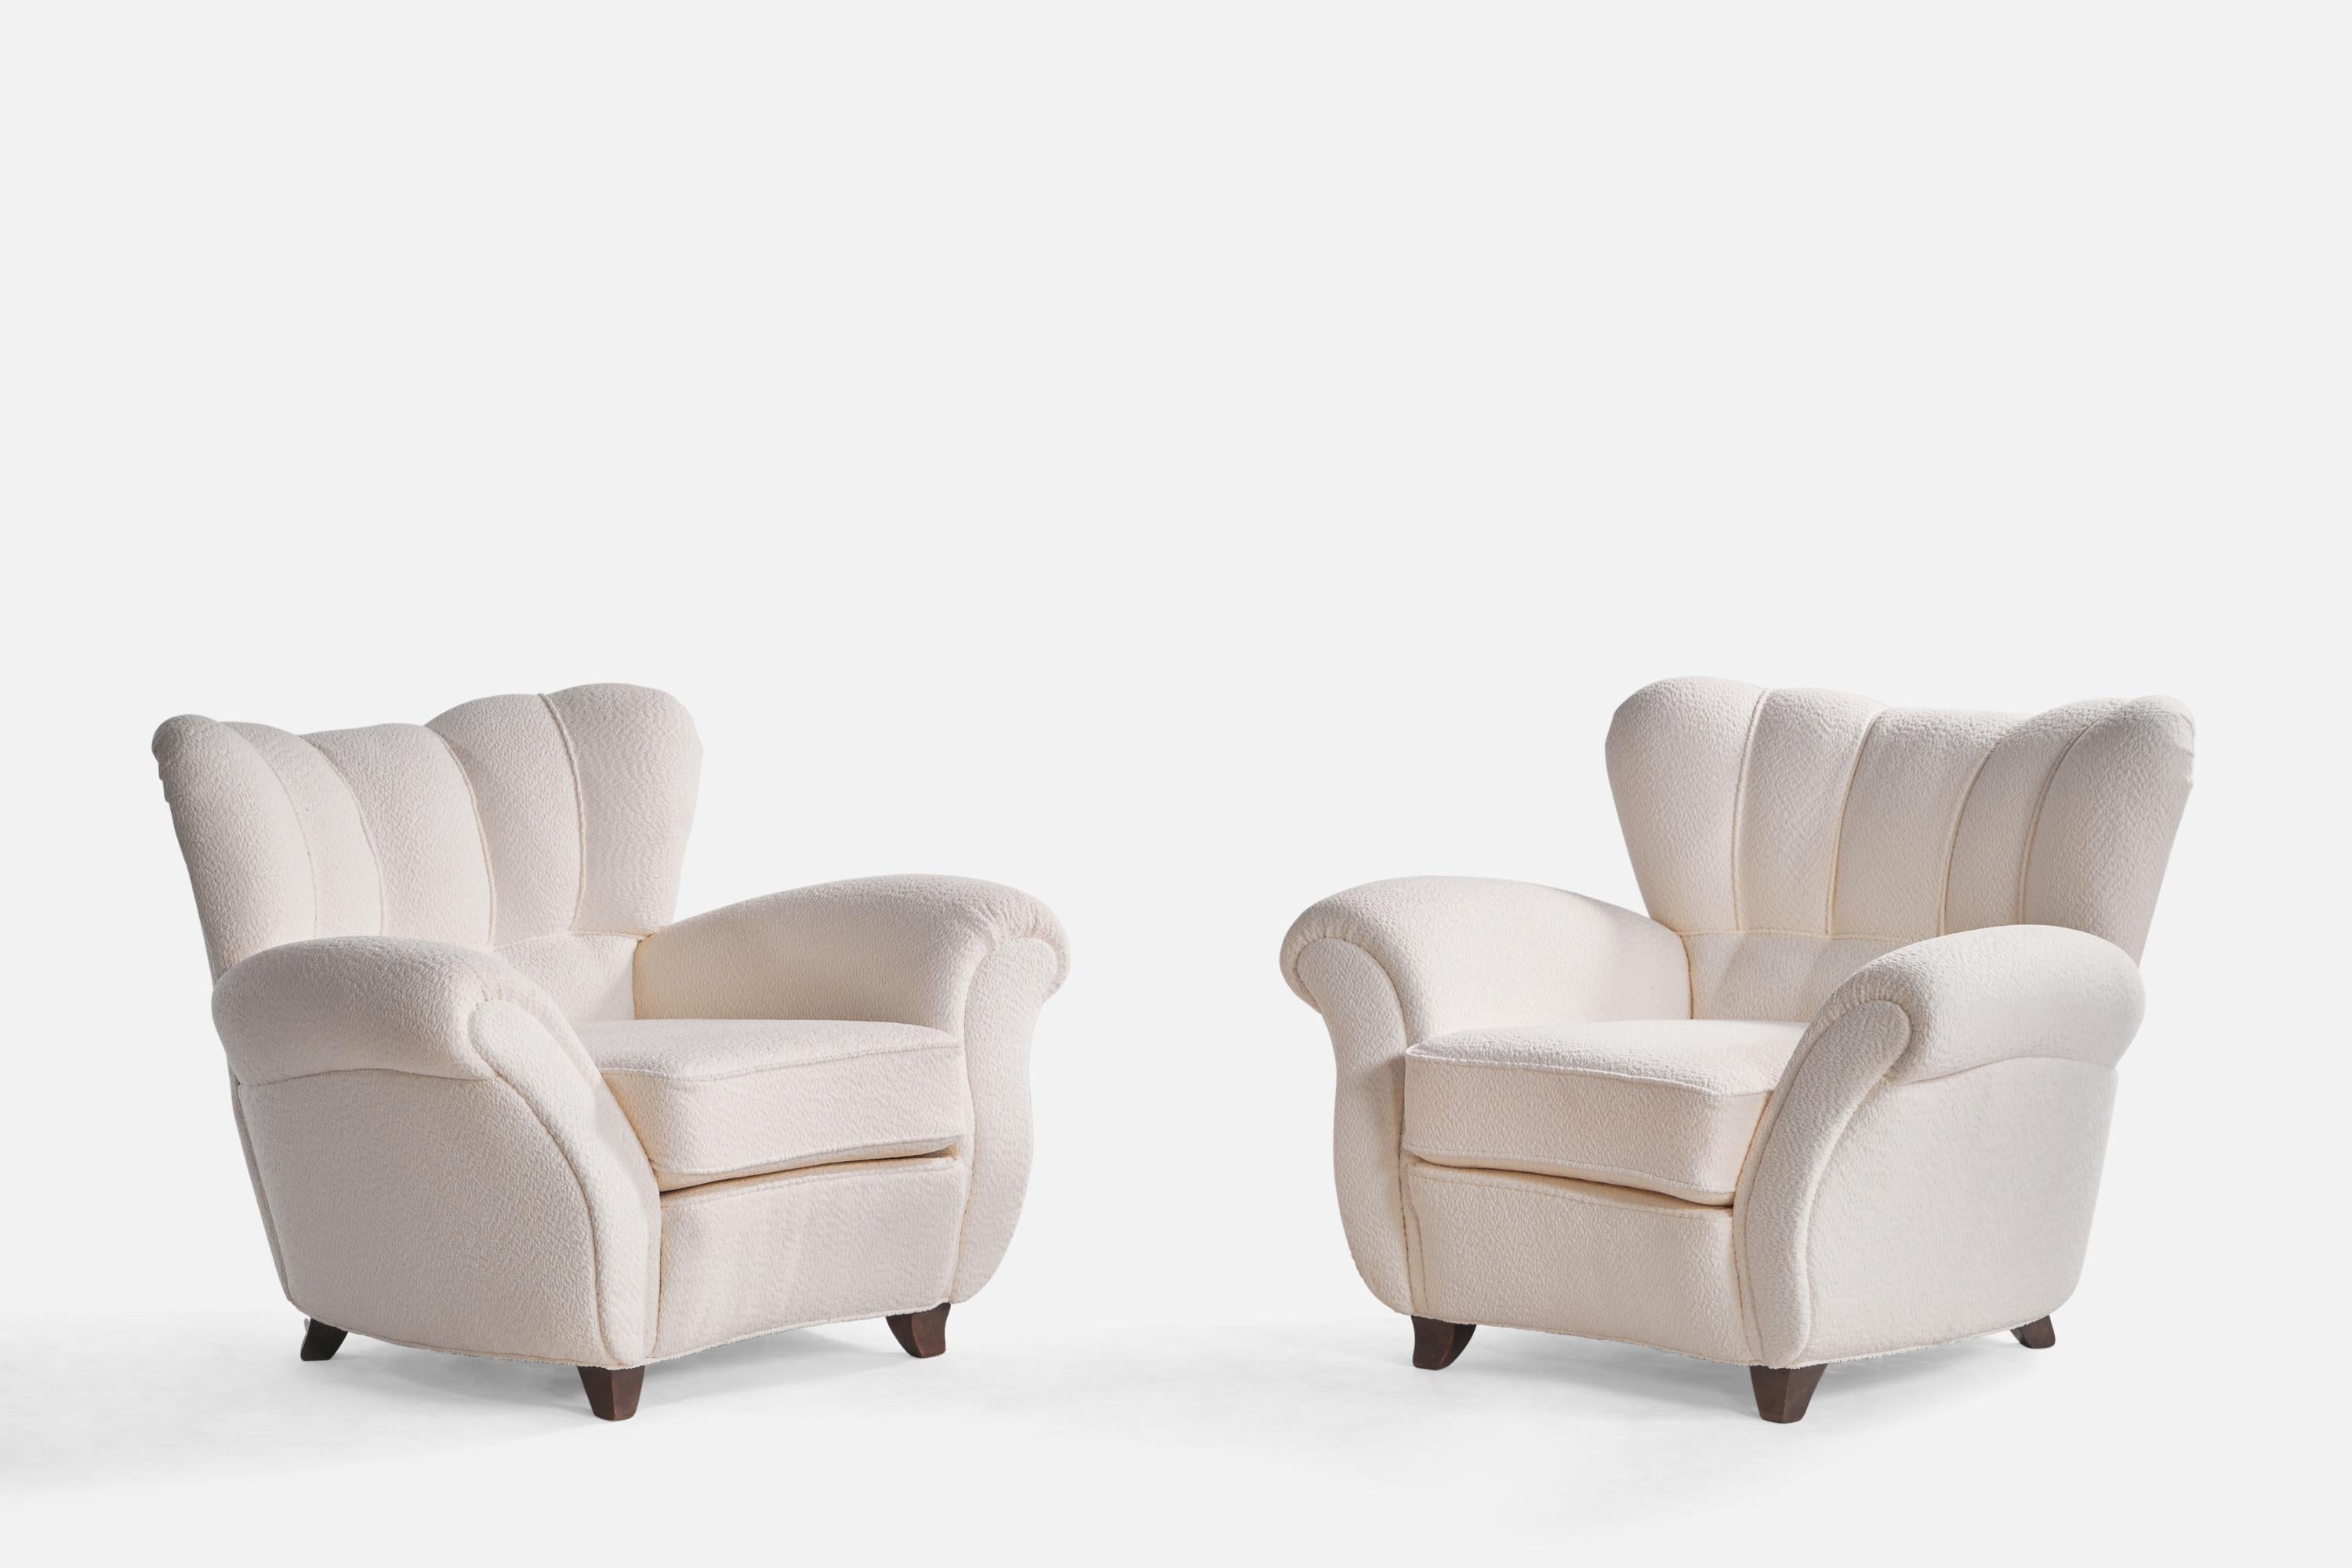 A pair of wood and white bouclé fabric lounge chairs designed and produced by Guglielmo Ulrich, Italy, 1940s.

Seat height: 17”

Reupholstered in brand new fabric.